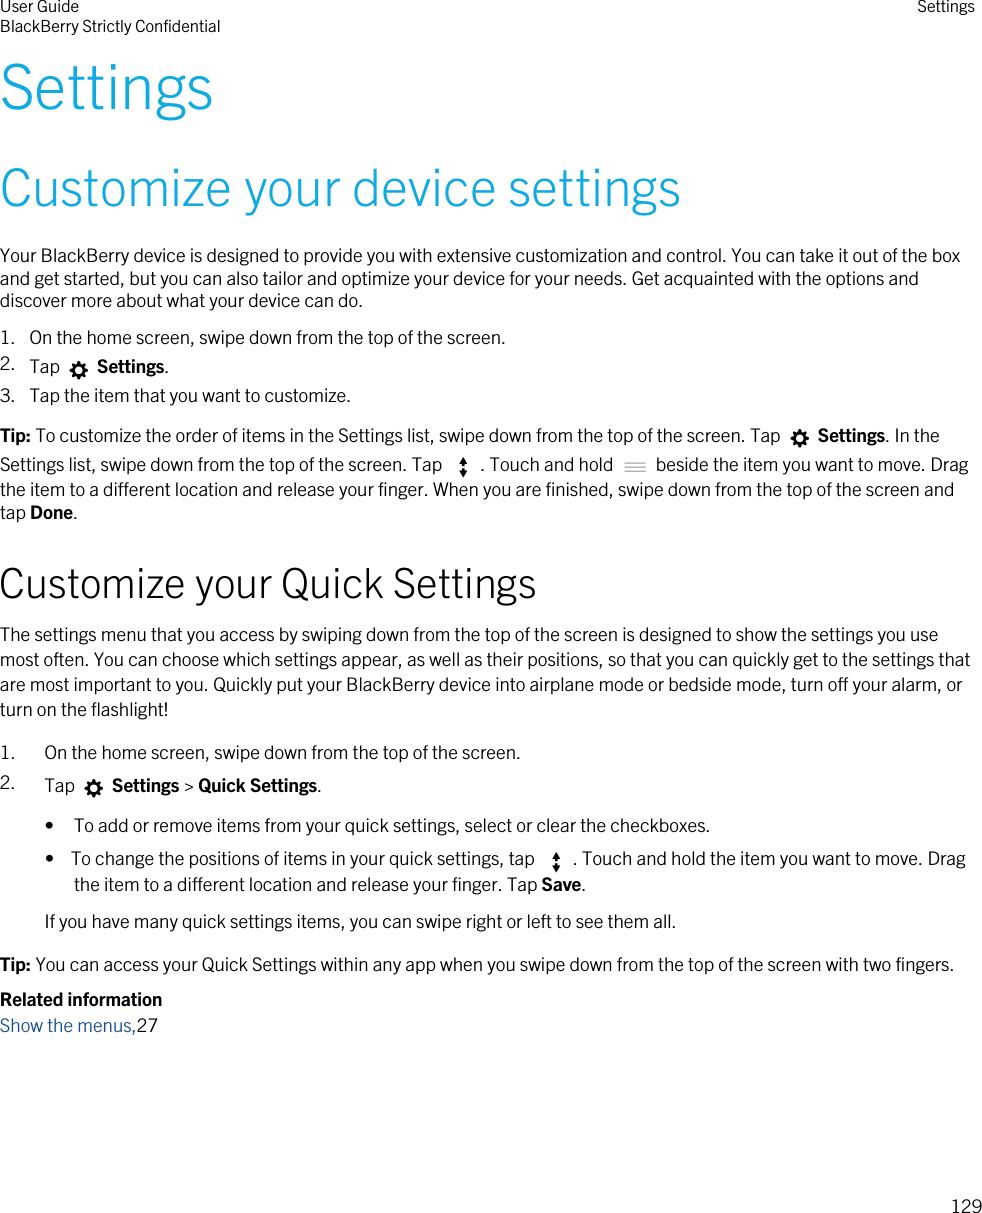 SettingsCustomize your device settingsYour BlackBerry device is designed to provide you with extensive customization and control. You can take it out of the box and get started, but you can also tailor and optimize your device for your needs. Get acquainted with the options and discover more about what your device can do.1. On the home screen, swipe down from the top of the screen.2. Tap   Settings.3. Tap the item that you want to customize.Tip: To customize the order of items in the Settings list, swipe down from the top of the screen. Tap   Settings. In the Settings list, swipe down from the top of the screen. Tap  . Touch and hold   beside the item you want to move. Drag the item to a different location and release your finger. When you are finished, swipe down from the top of the screen and tap Done.Customize your Quick SettingsThe settings menu that you access by swiping down from the top of the screen is designed to show the settings you use most often. You can choose which settings appear, as well as their positions, so that you can quickly get to the settings that are most important to you. Quickly put your BlackBerry device into airplane mode or bedside mode, turn off your alarm, or turn on the flashlight!1. On the home screen, swipe down from the top of the screen.2. Tap   Settings &gt; Quick Settings.• To add or remove items from your quick settings, select or clear the checkboxes.•  To change the positions of items in your quick settings, tap  . Touch and hold the item you want to move. Drag the item to a different location and release your finger. Tap Save.If you have many quick settings items, you can swipe right or left to see them all.Tip: You can access your Quick Settings within any app when you swipe down from the top of the screen with two fingers.Related informationShow the menus,27User GuideBlackBerry Strictly Confidential Settings129